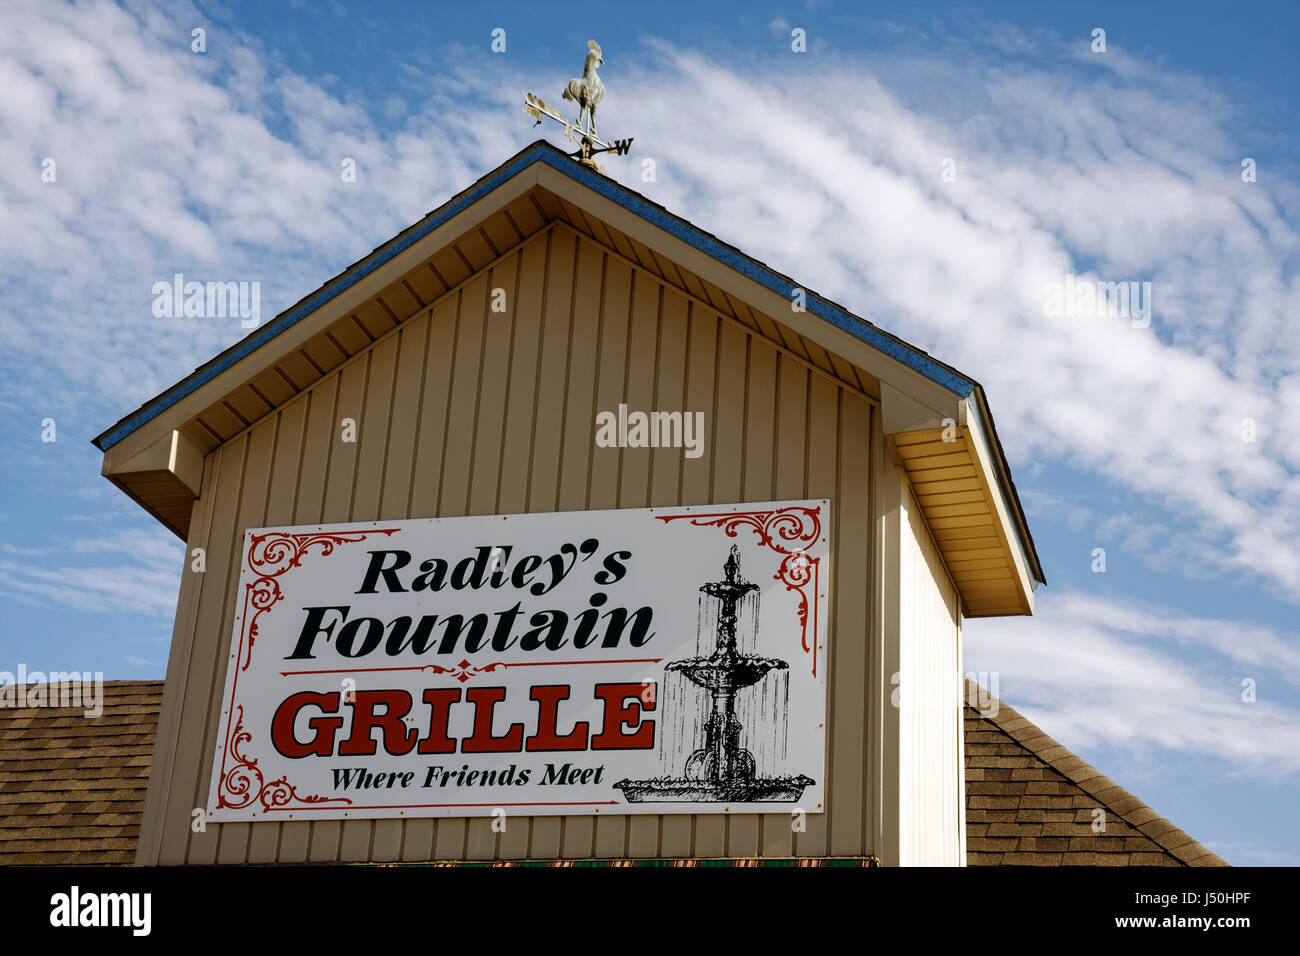 Monroeville Alabama,Radley's Fountain Grille,restaurant restaurants food dining cafe cafes,sign,turret,weather vane,dining,home cooking,AL080515038 Stock Photo